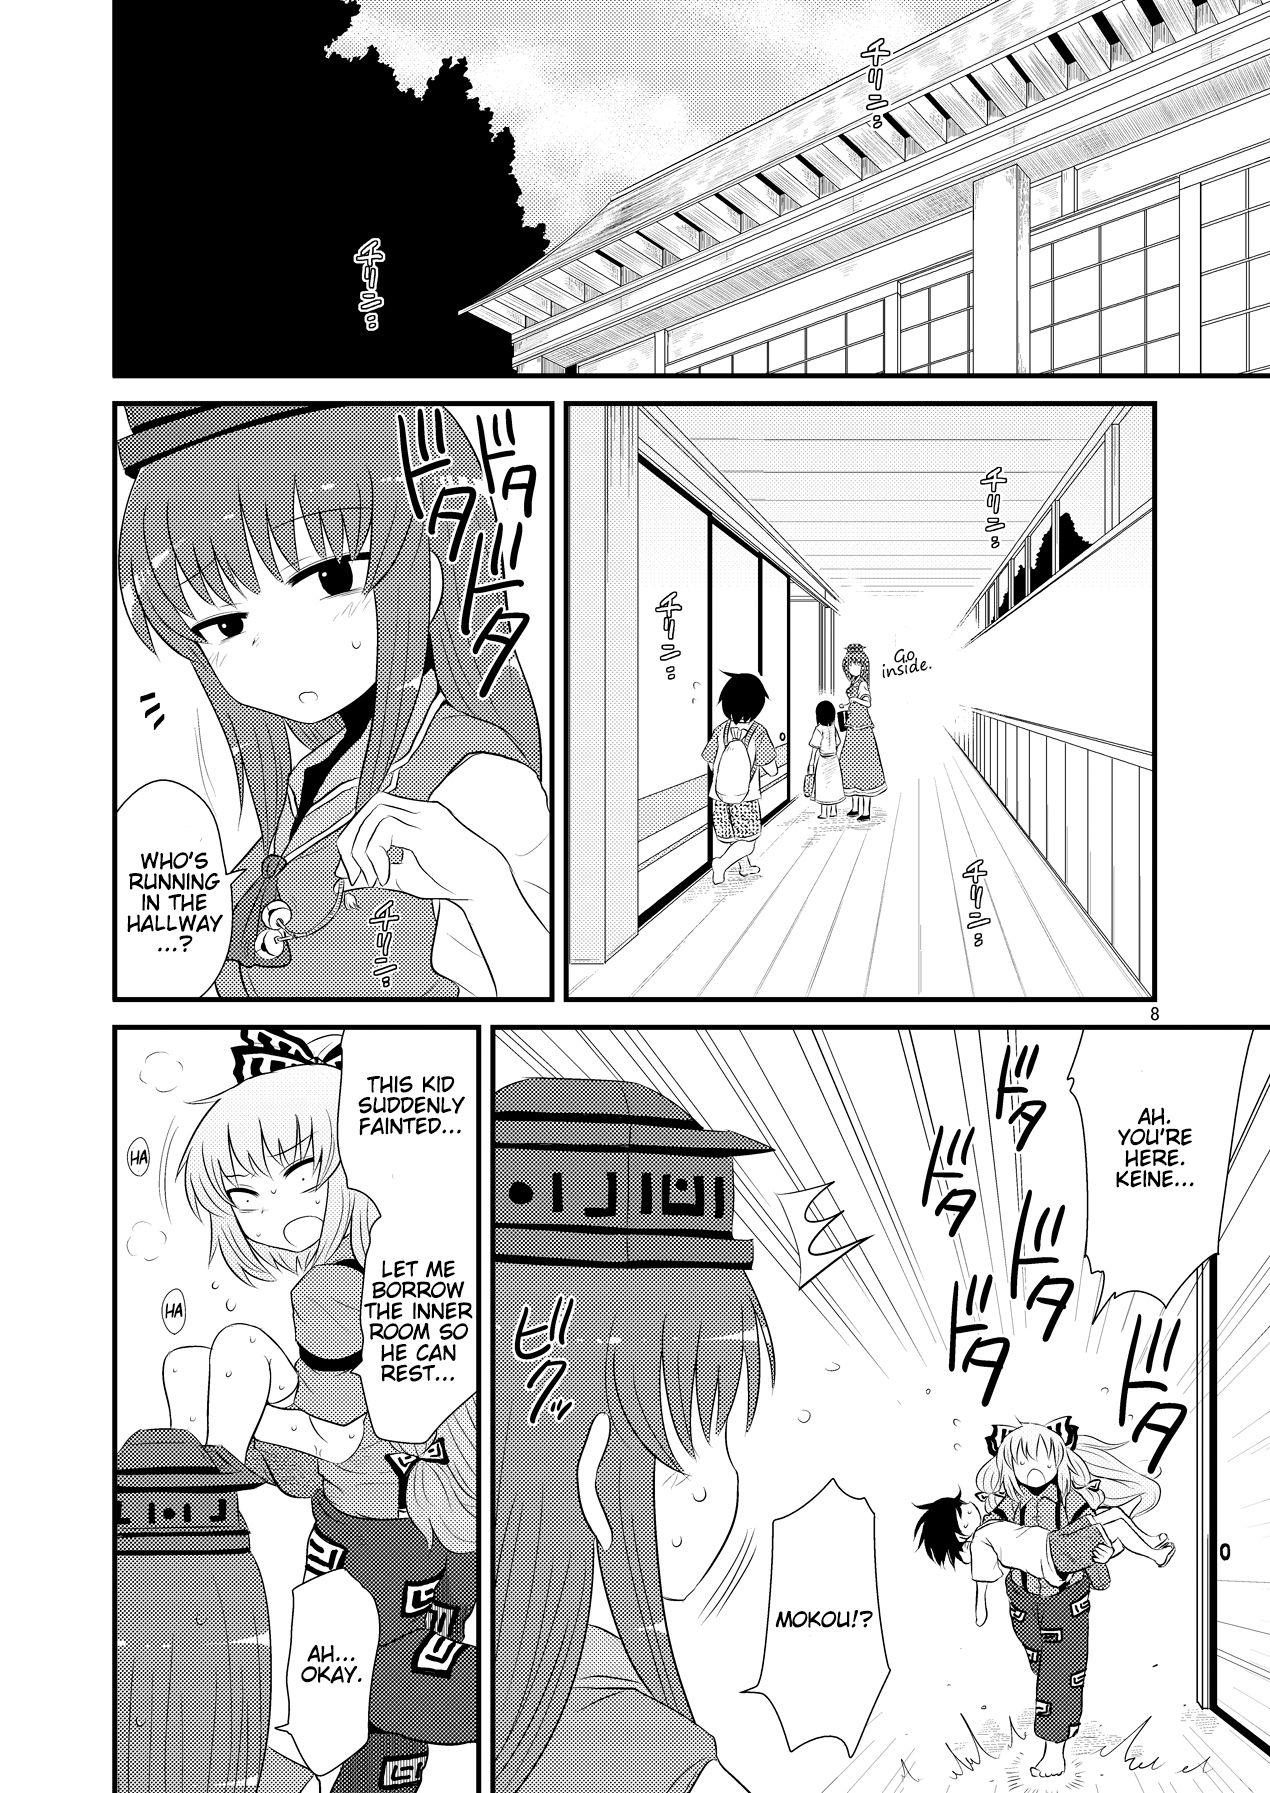 Russian SURUDAKE Hachi. - Touhou project Monster - Page 7